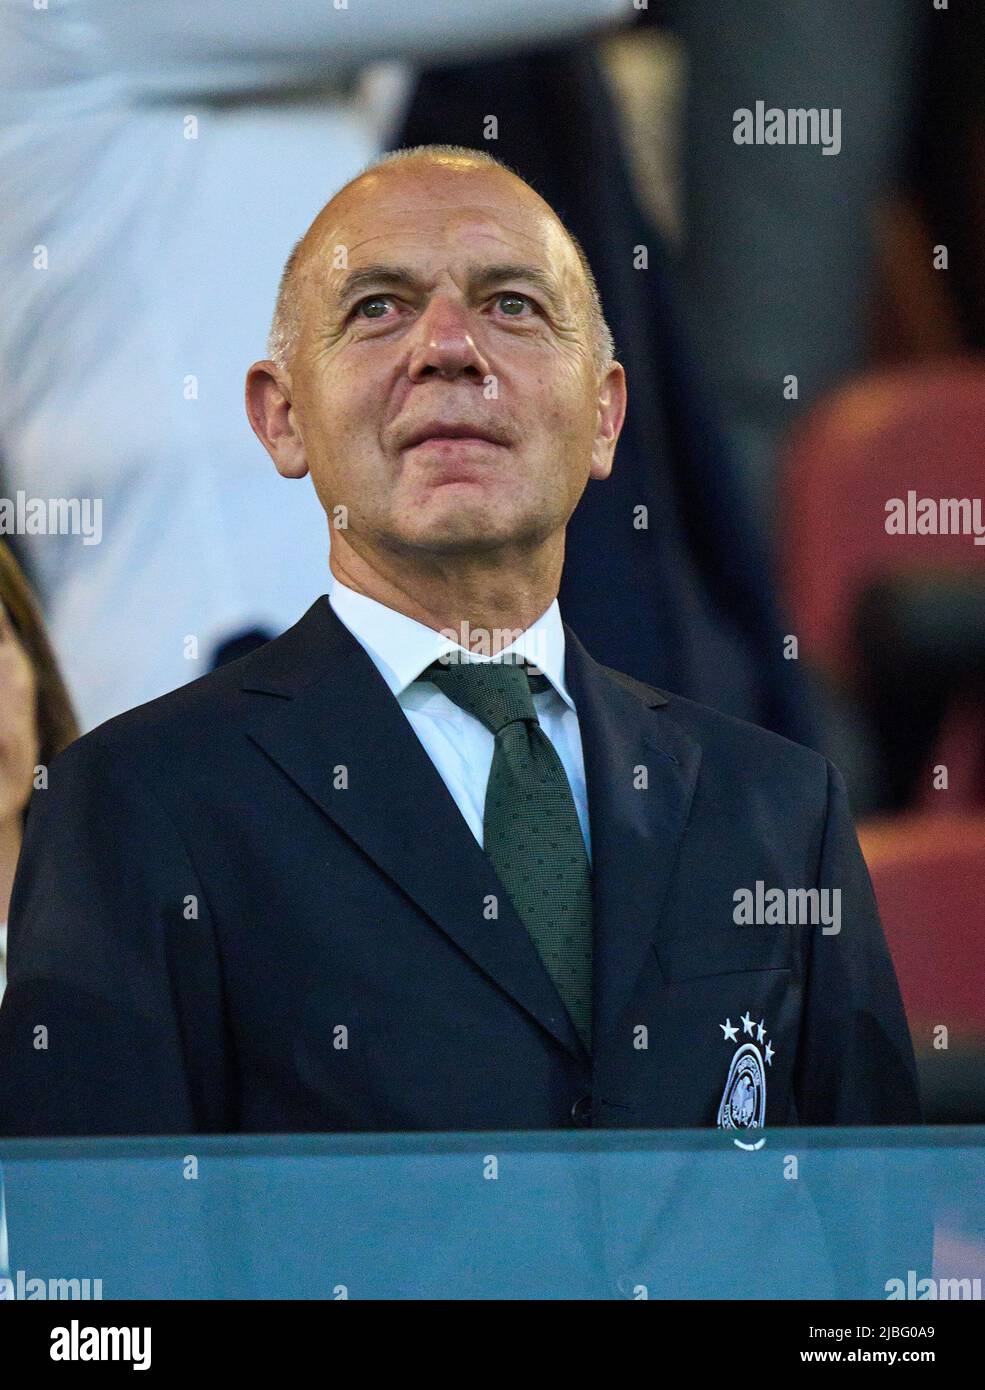 Bernd Neuendorf,  DFB President German Football Association,  in the UEFA Nations League 2022 match ITALY - GERMANY 1-1  in Season 2022/2023 on Juni 04, 2022  in Bologna, Italy.  © Peter Schatz / Alamy Live News Stock Photo